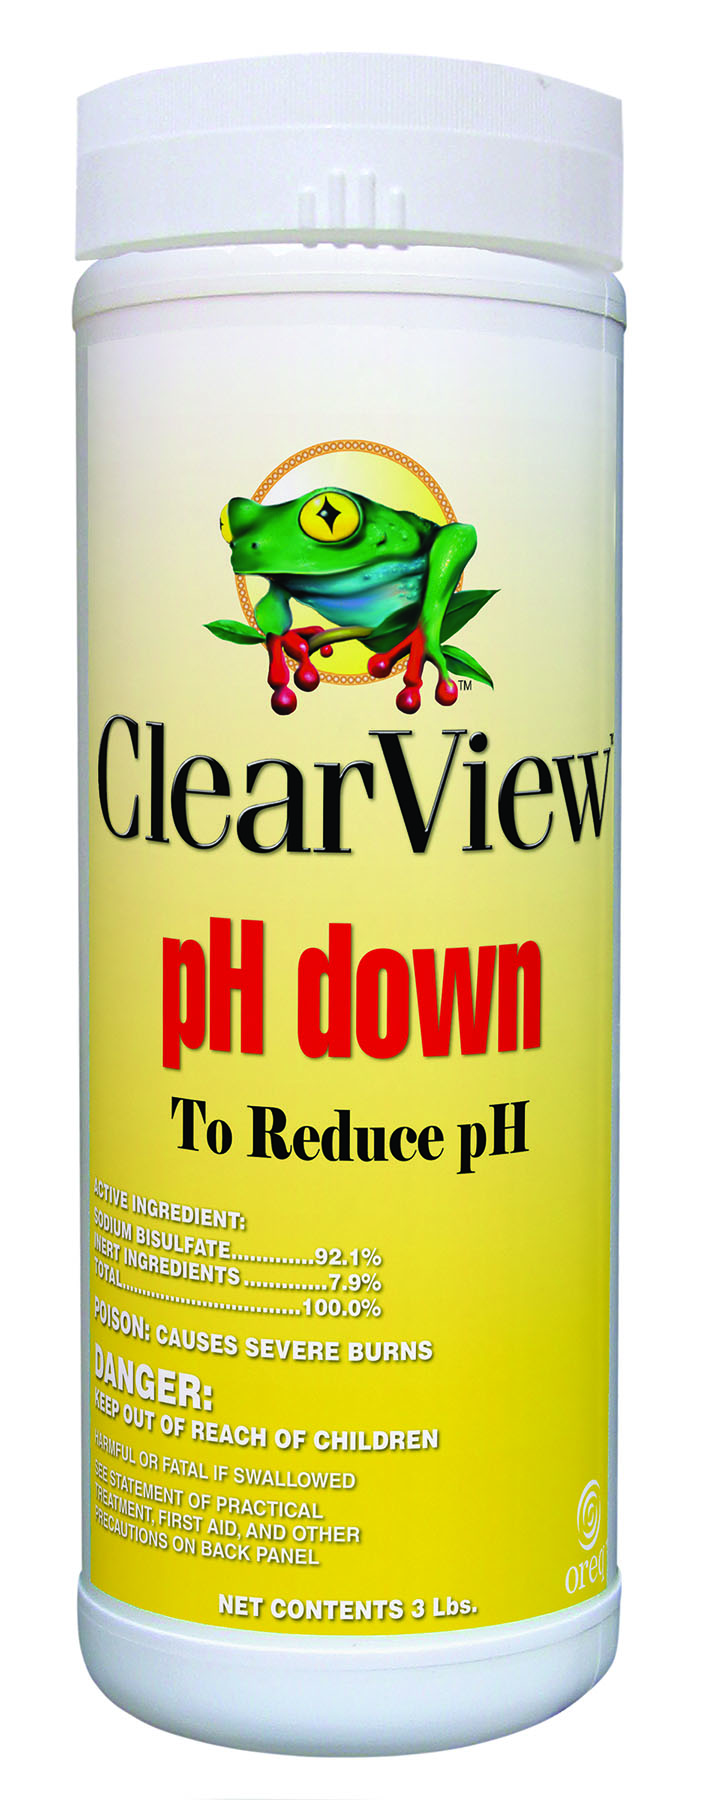 Clearview Ph Down 8X7 lb/cs - CLEARVIEW